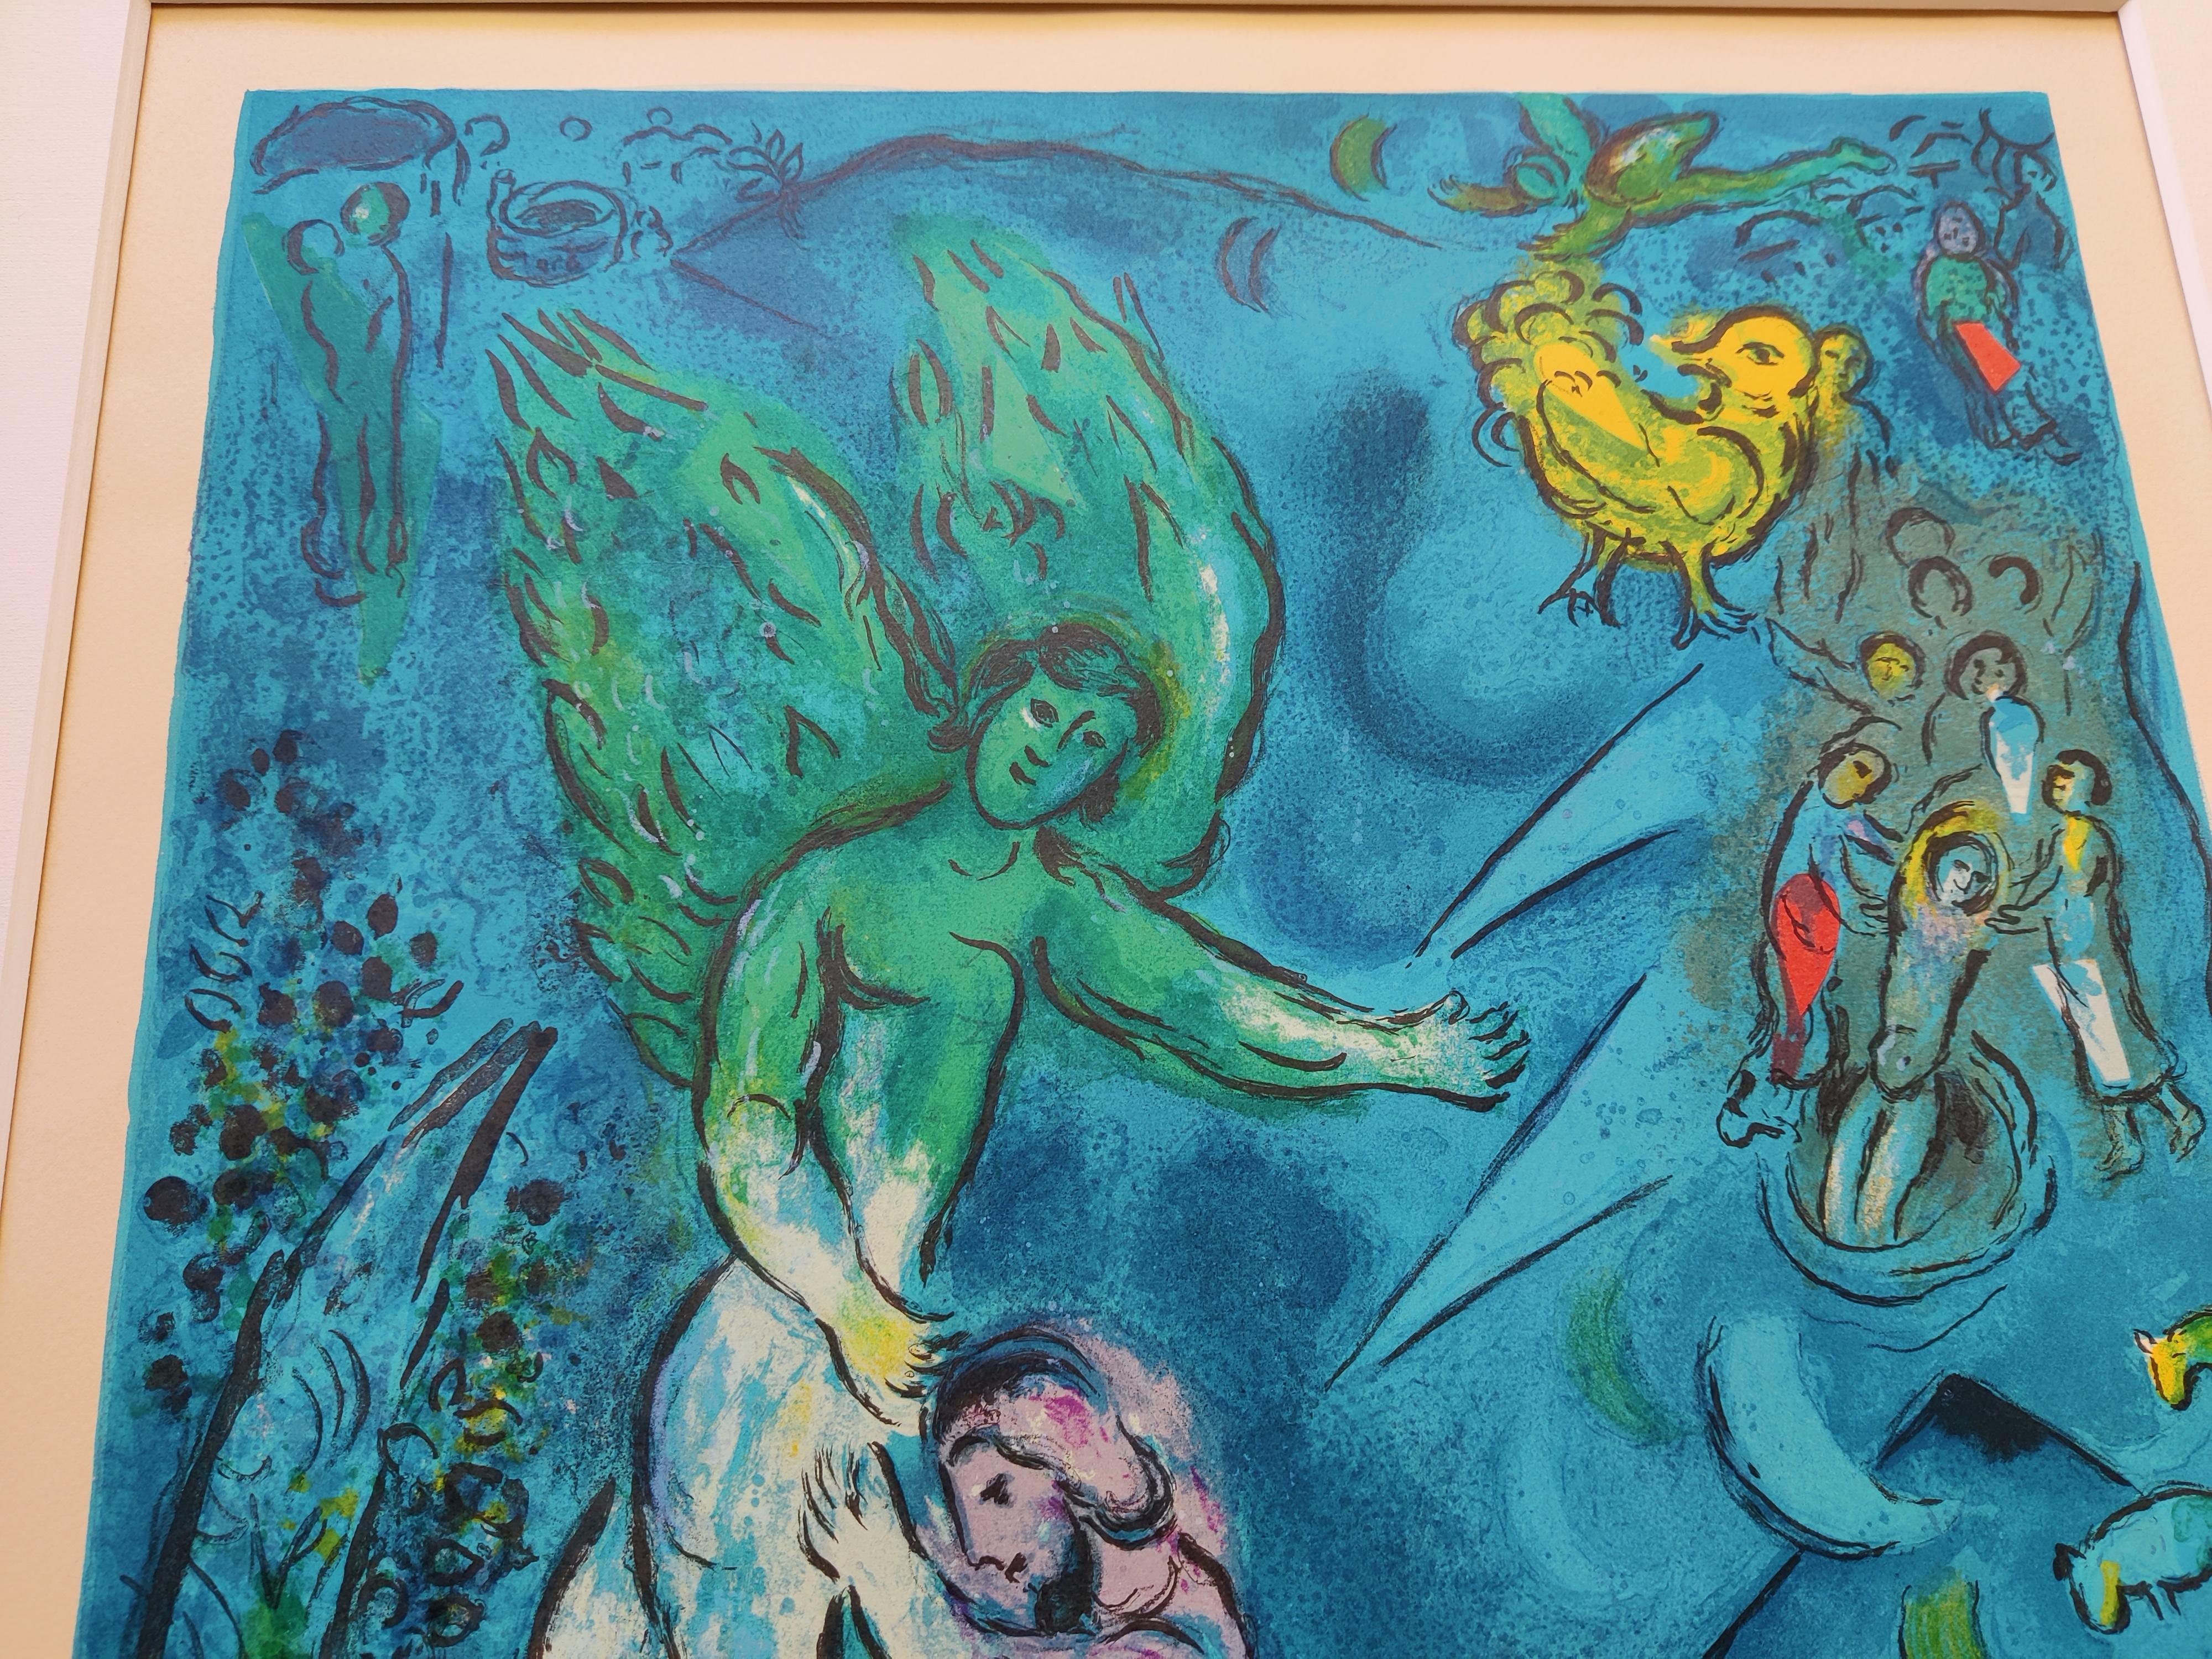 After Marc Chagall (1887-1985)
La lutte du Jacob et du l'Ange (The Fight Between Jacob & the Angel)   1967
BY CHARLES SORLIER (1921-1990) 
SORLIER P. 104
Signed and numbered 12/100
Full margin 
Watermark on the margin
Image: 52 x 41 cm
Sheet: 75.6 X